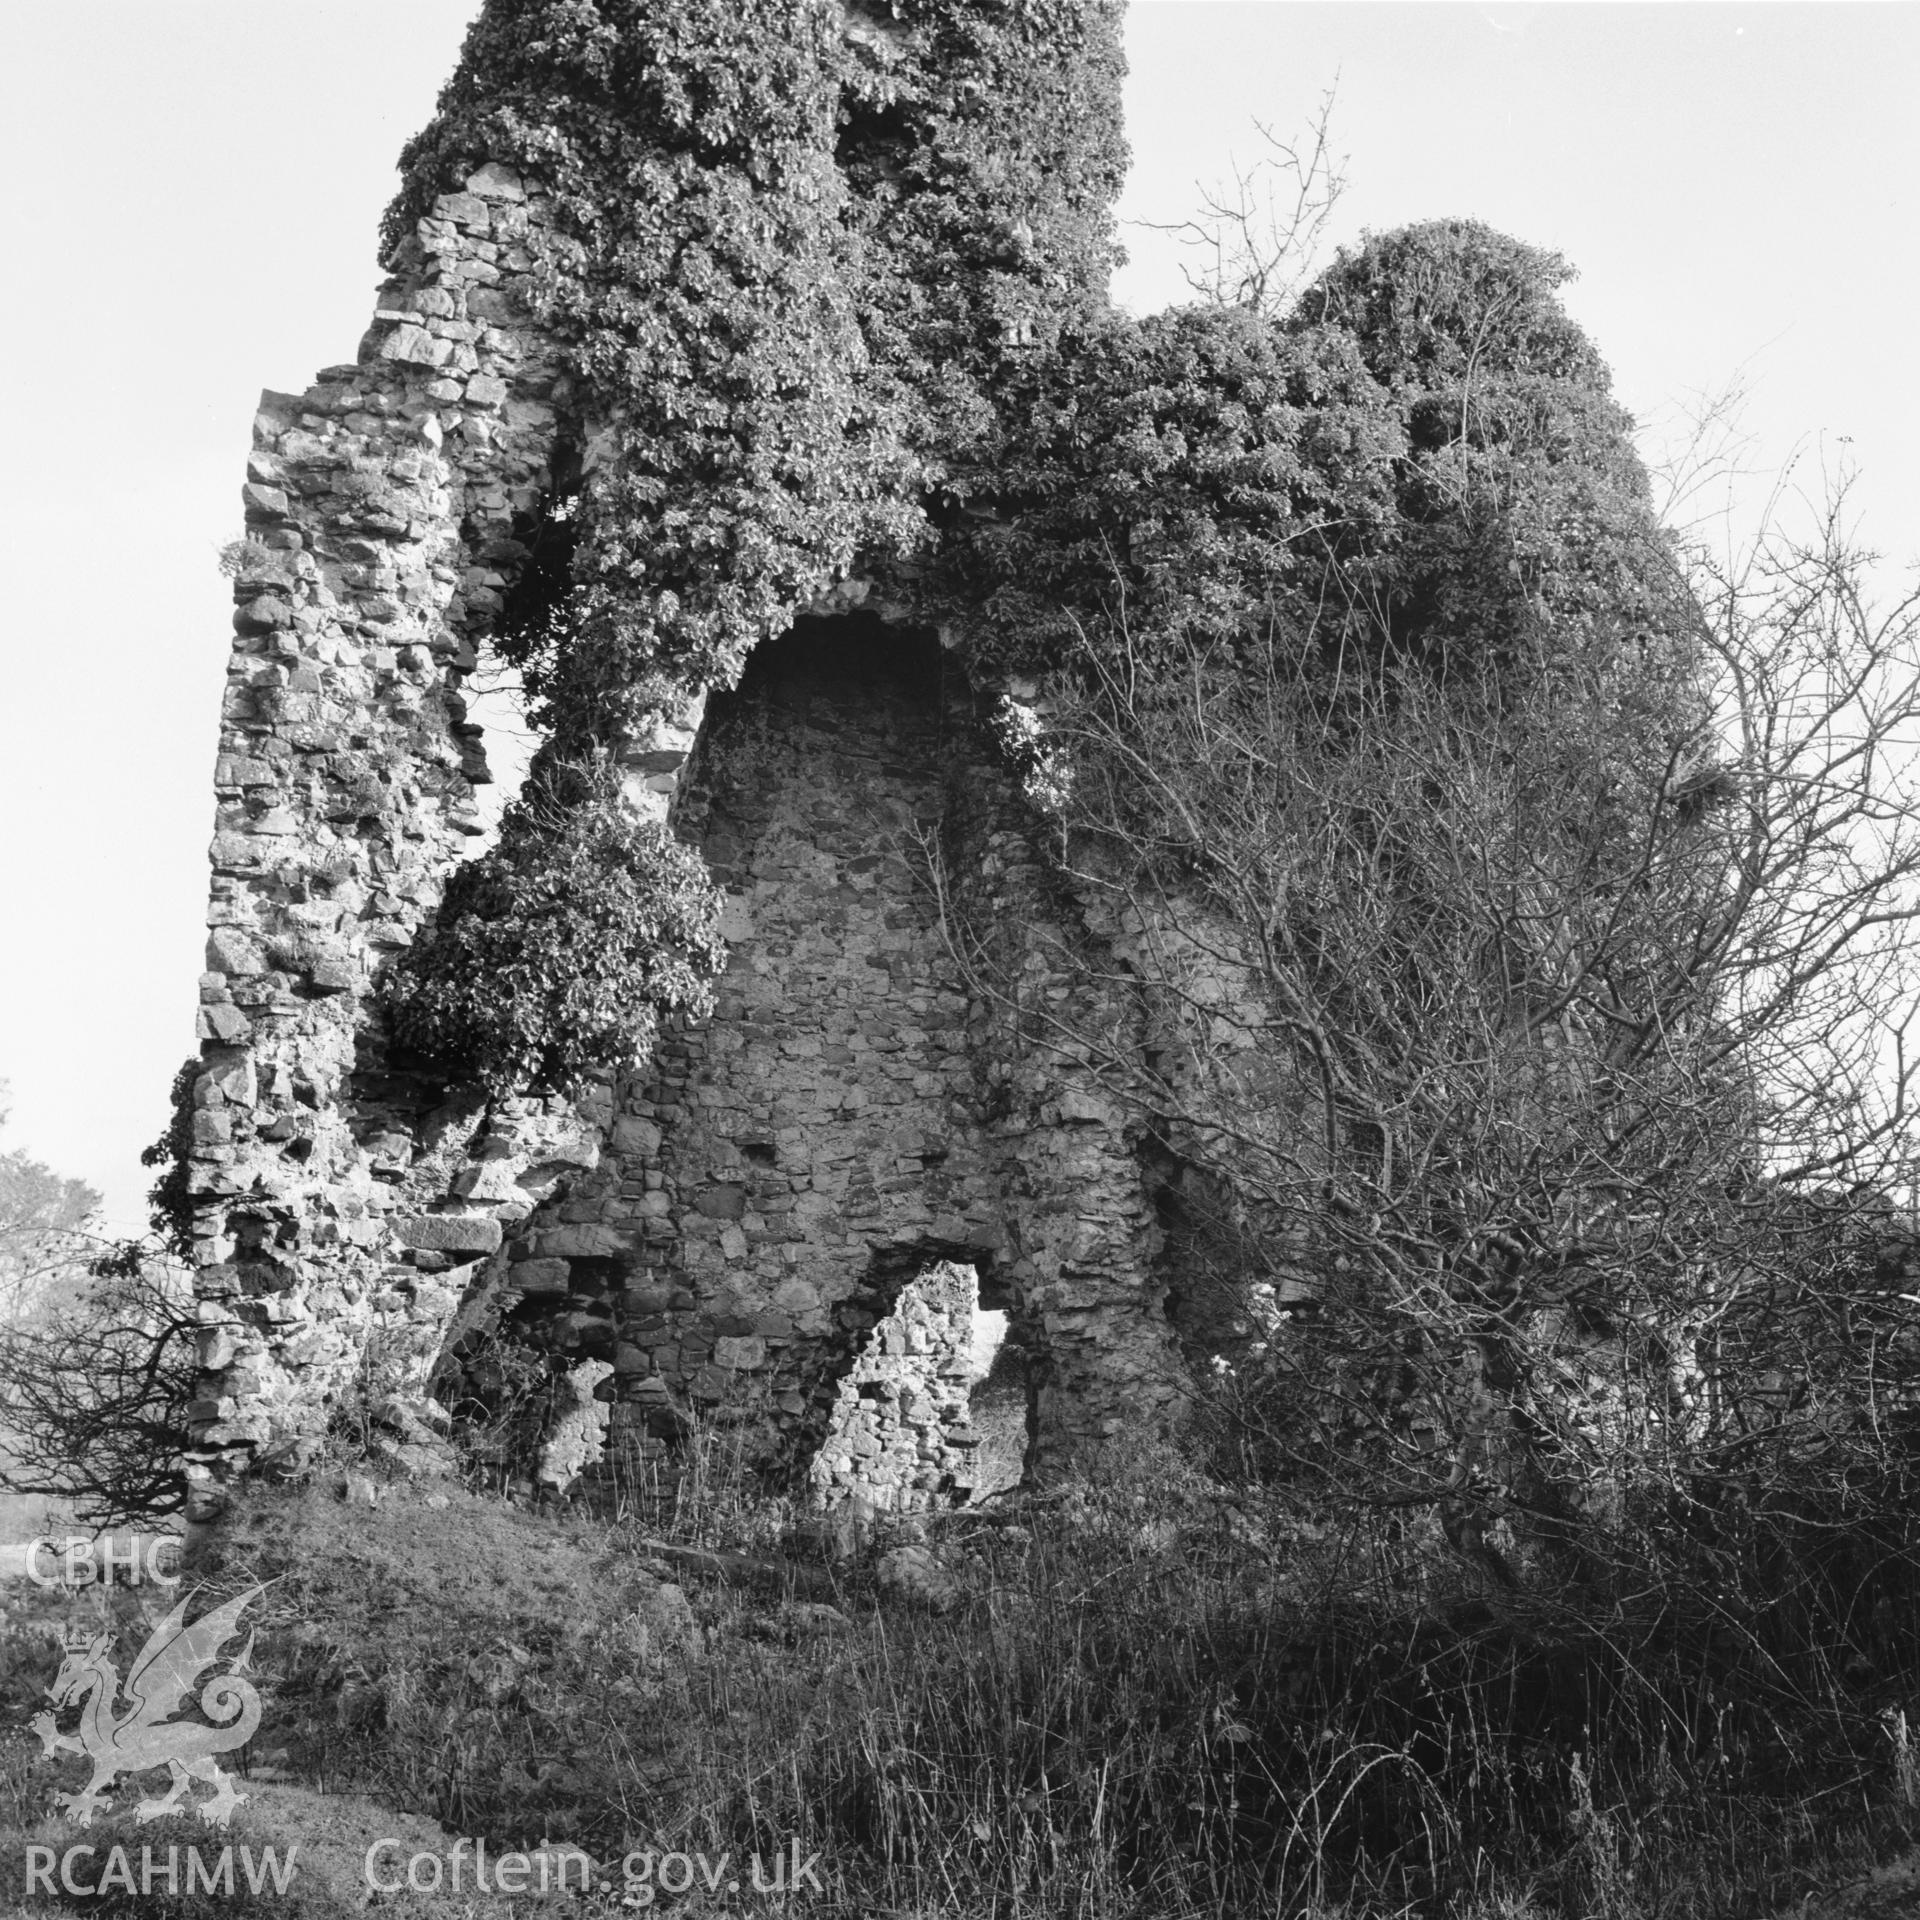 Black and white print of an exterior view of the ruins of Haroldstone, St Isels.